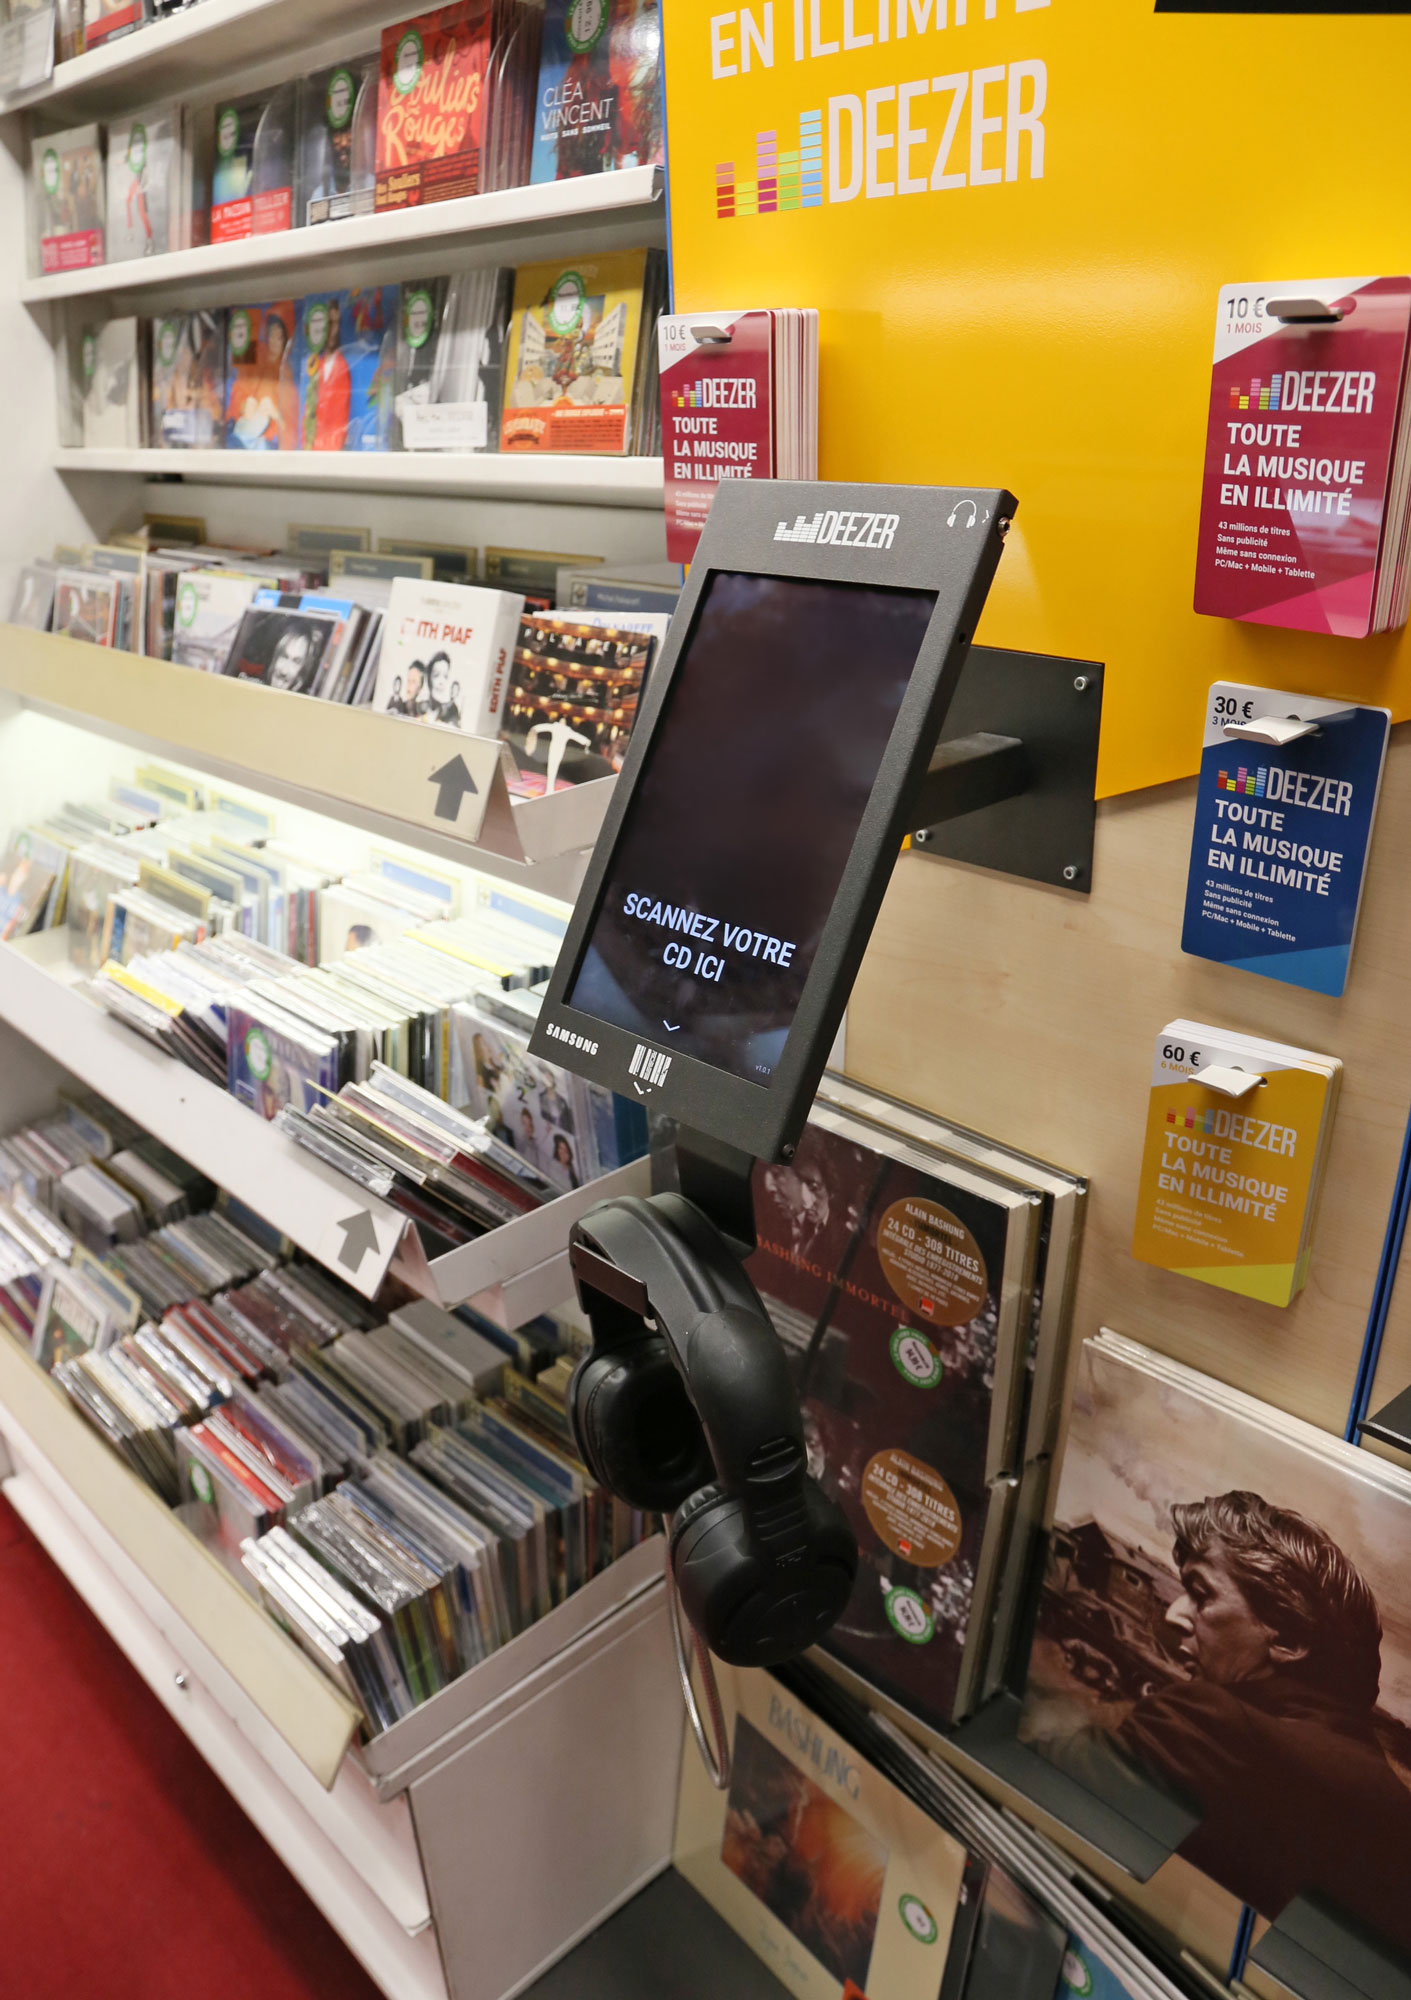 Deezer station in situation at the FNAC